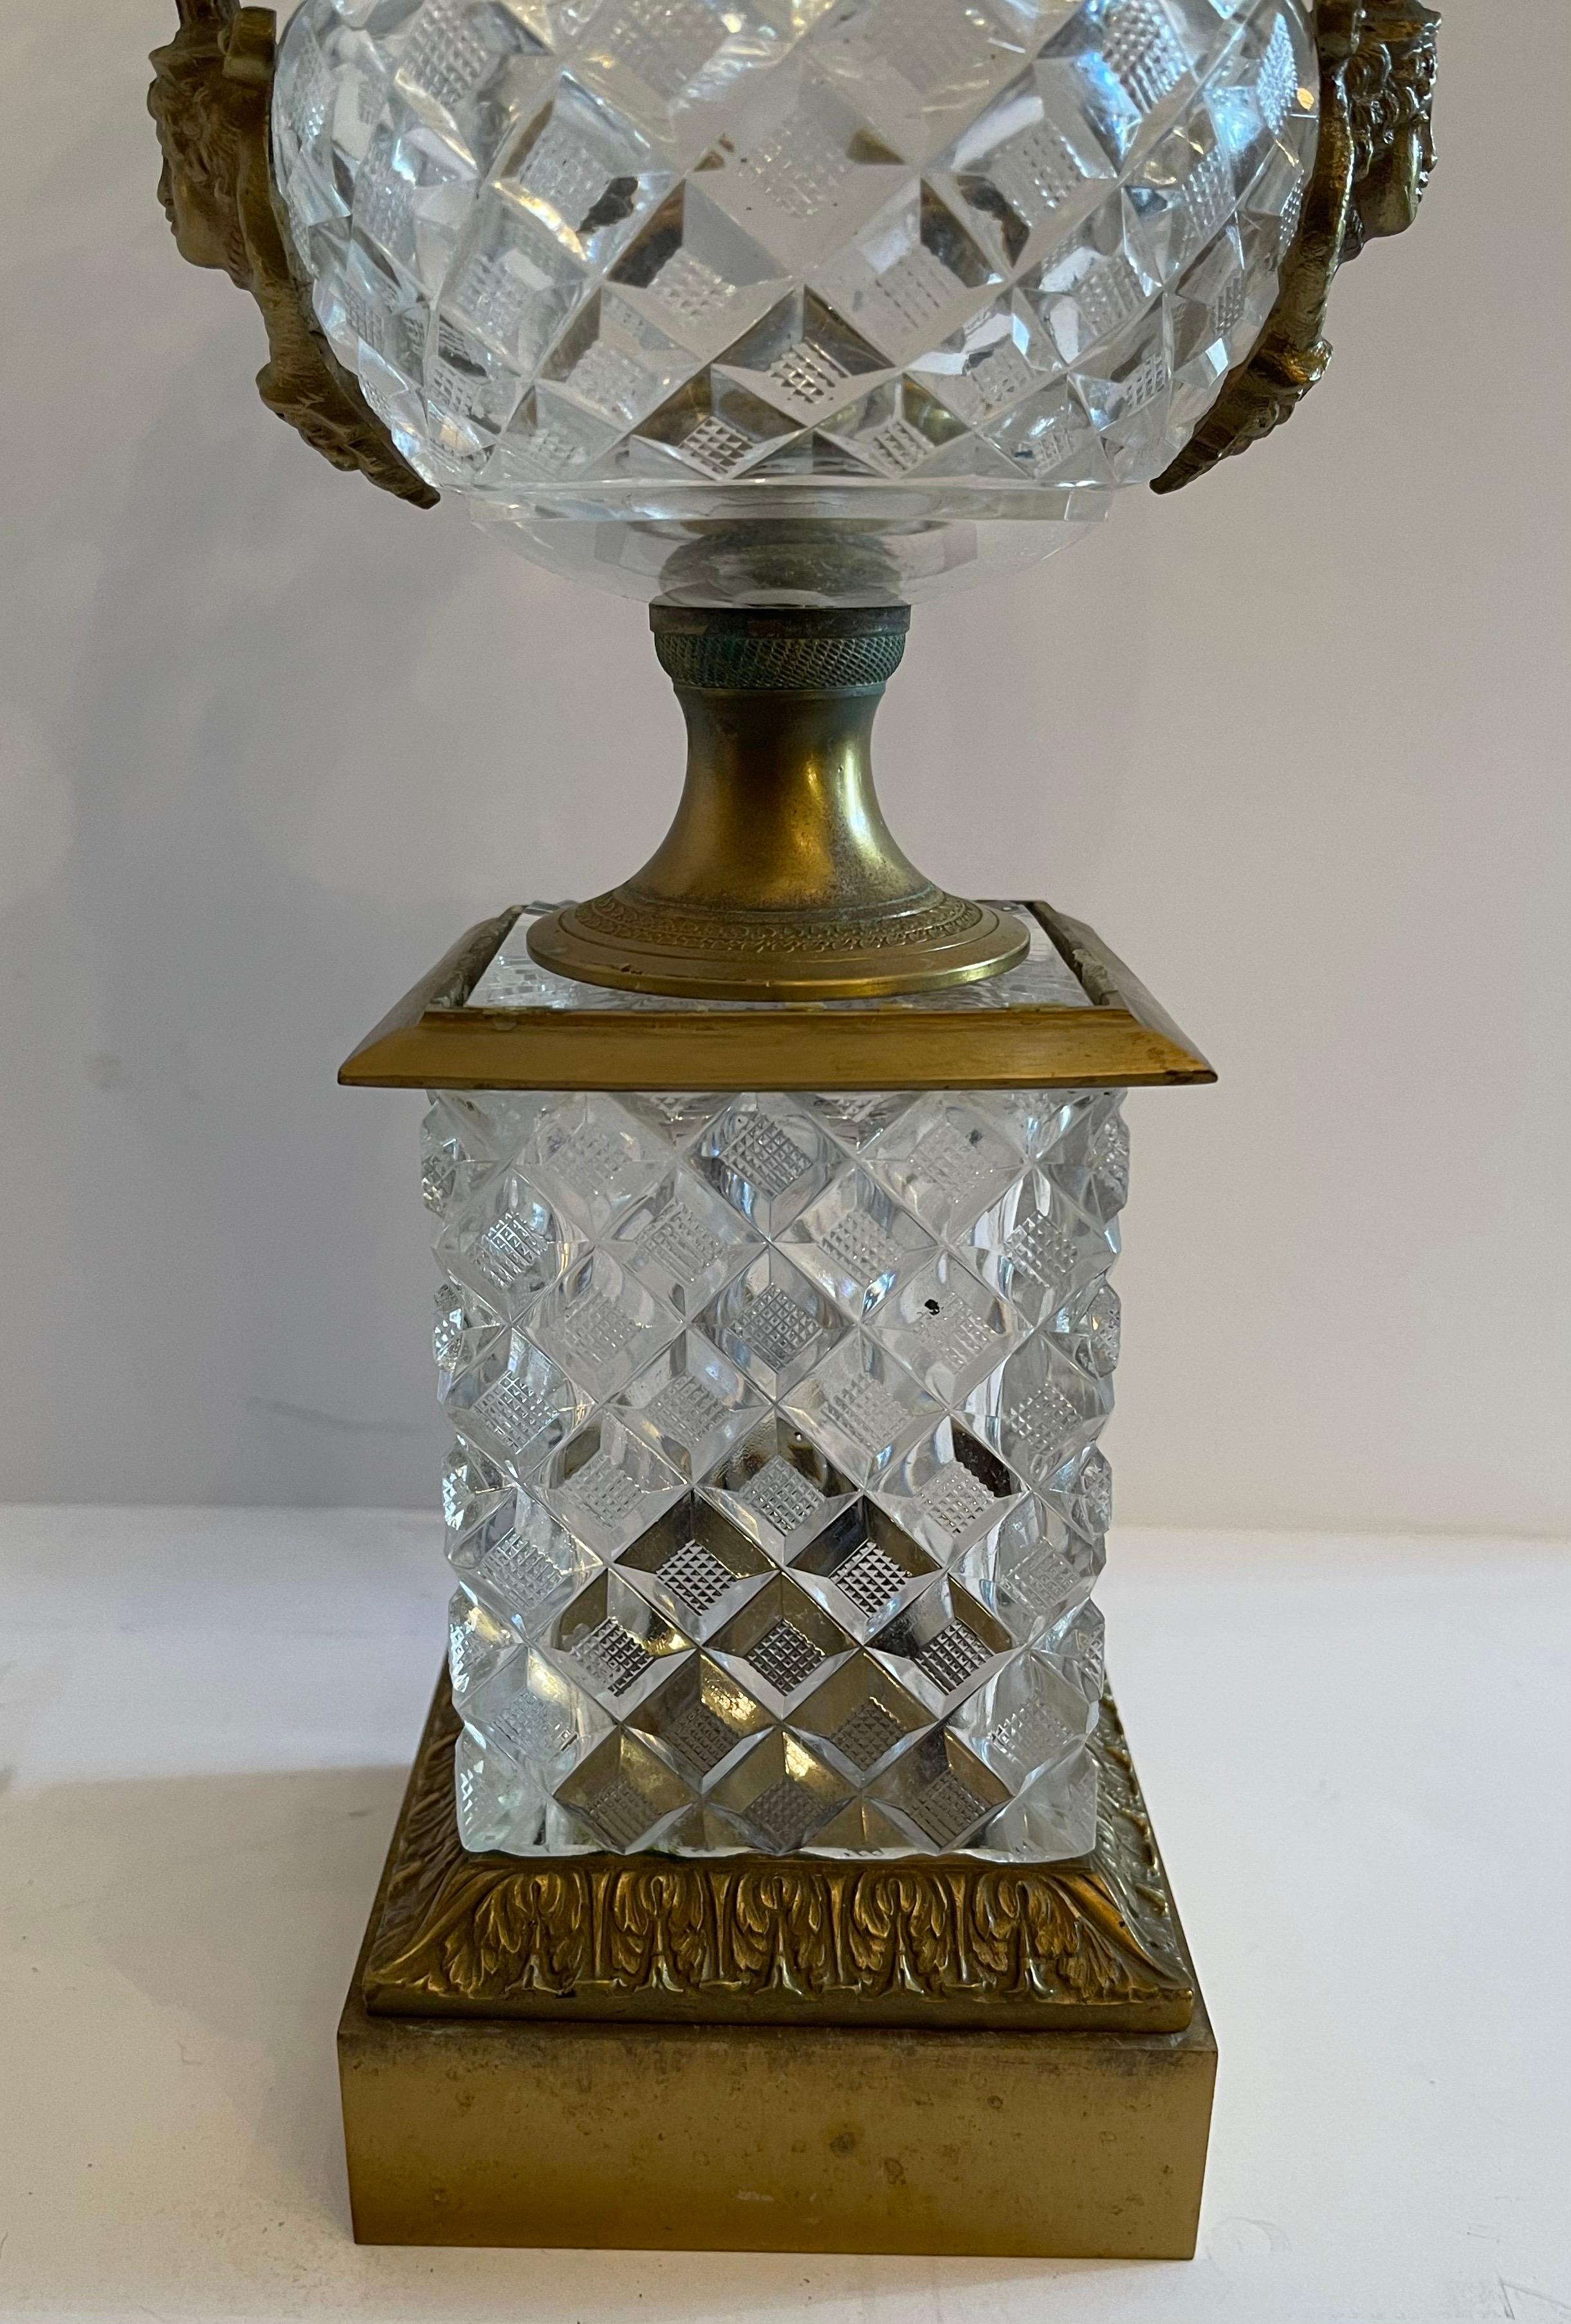 Wonderful French Empire Neoclassical Cut Crystal Bronze Ormolu Urn Centerpiece In Good Condition For Sale In Roslyn, NY